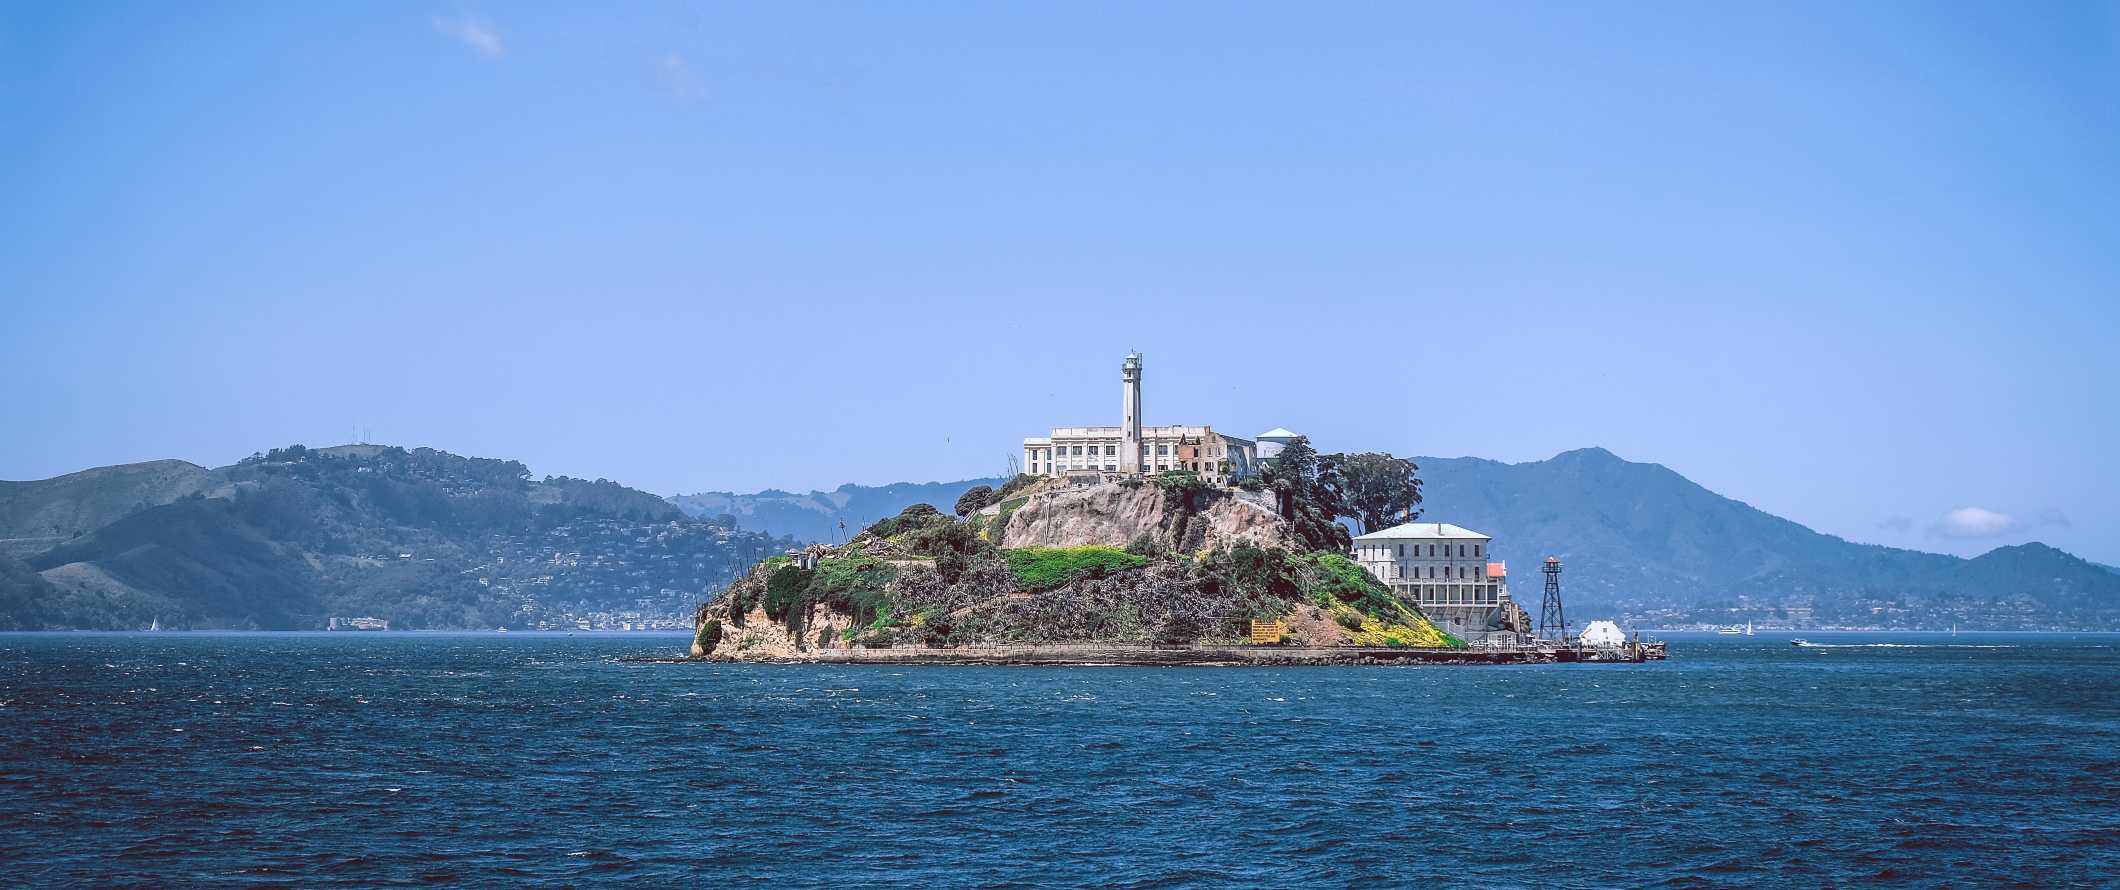 View of Alcatraz, an old prison on a rocky island in San Francisco, California.